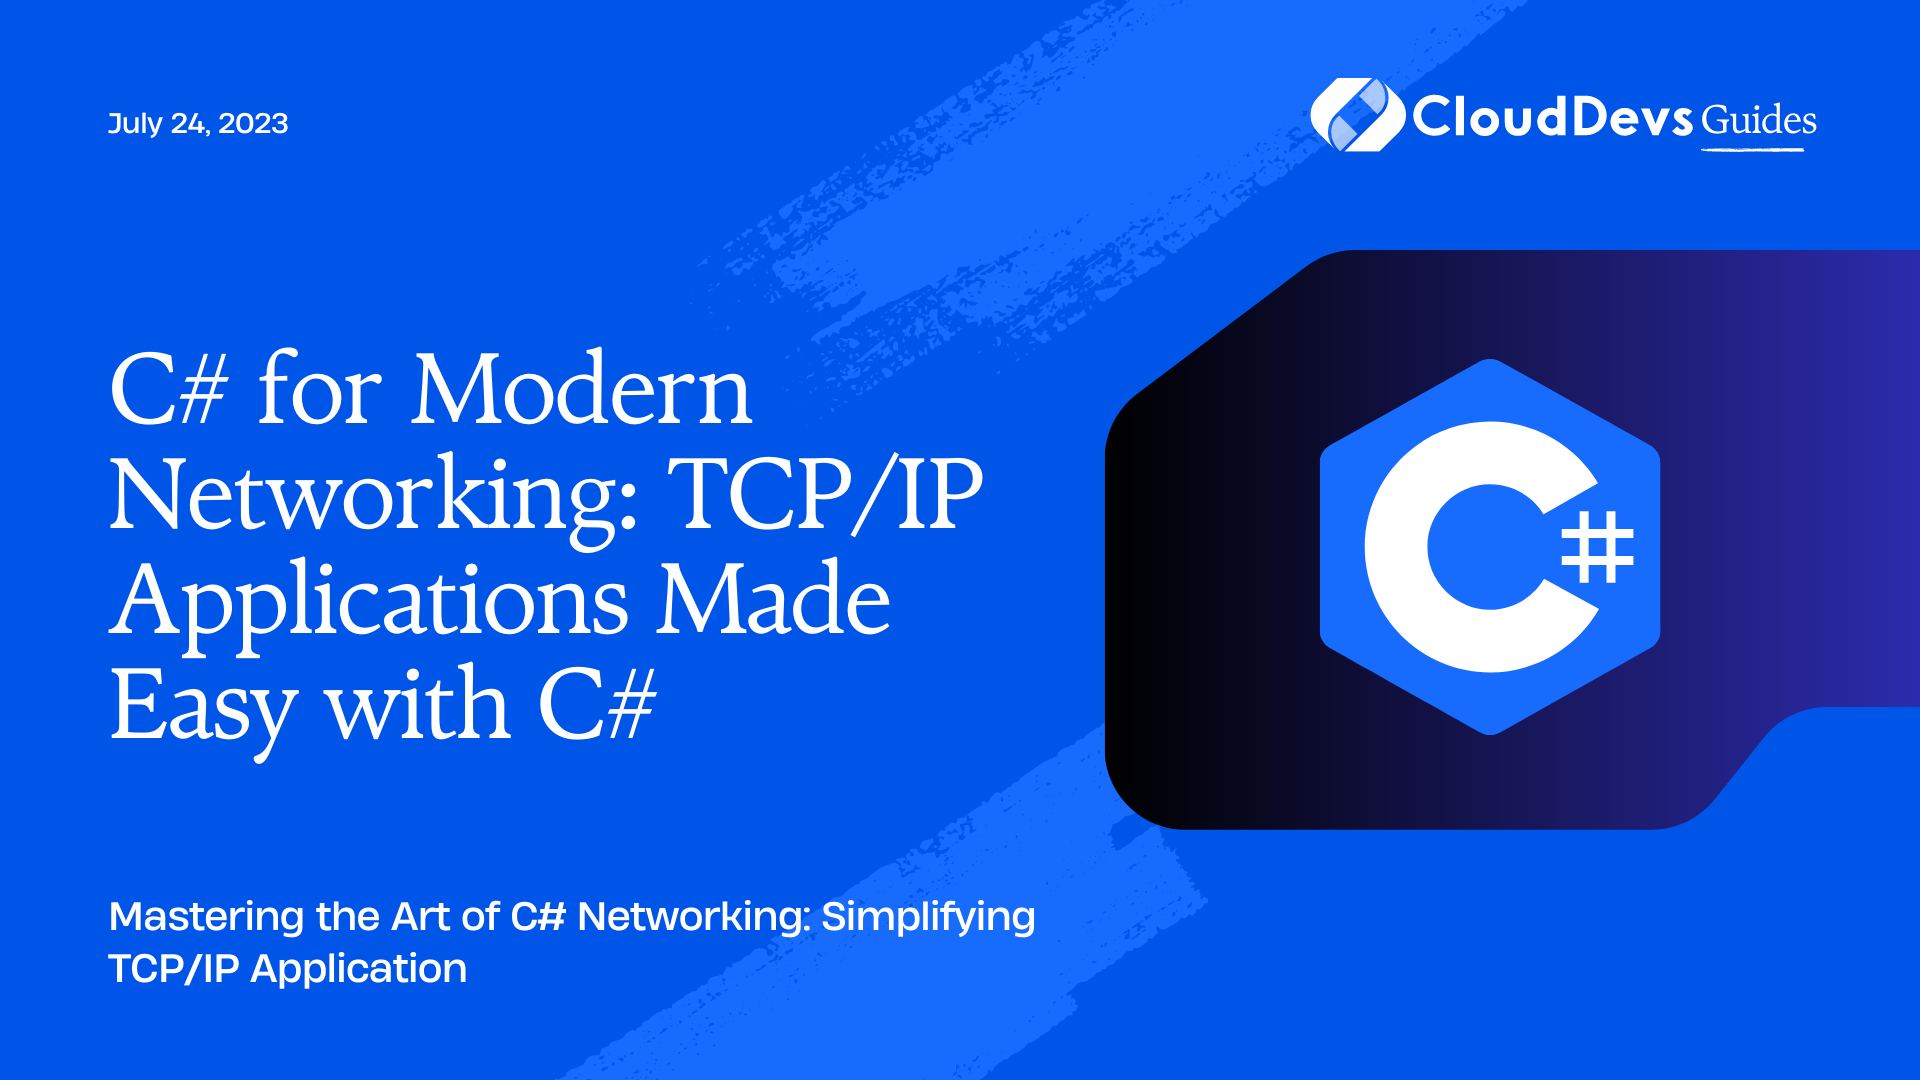 C# for Modern Networking: TCP/IP Applications Made Easy with C#